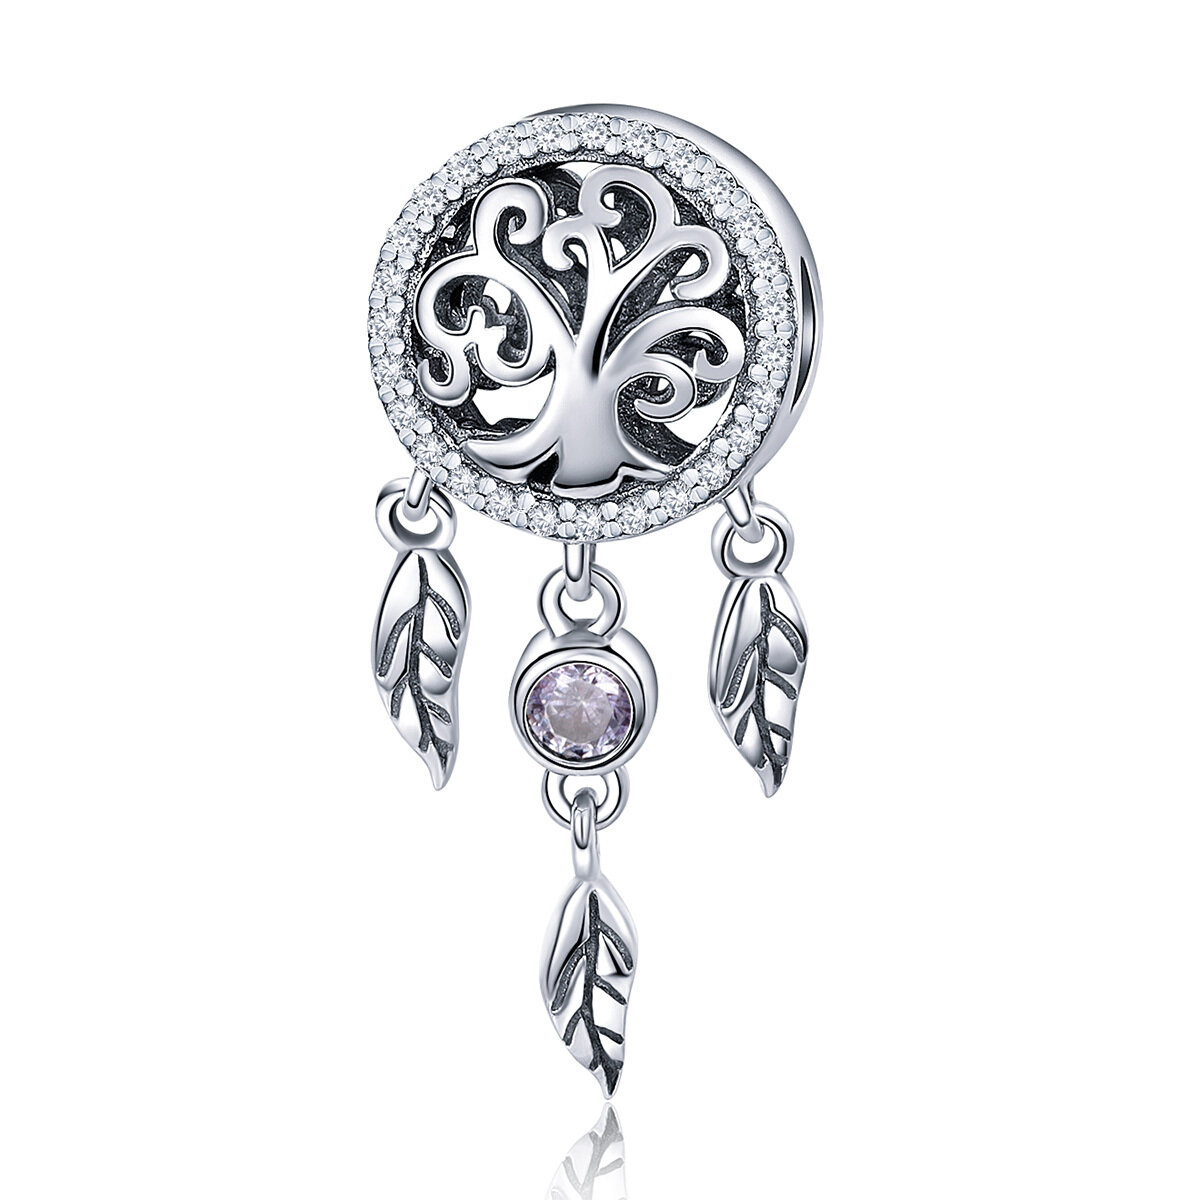 GemKing SCC723 the Dream Catcher S925 Sterling Silver Charm